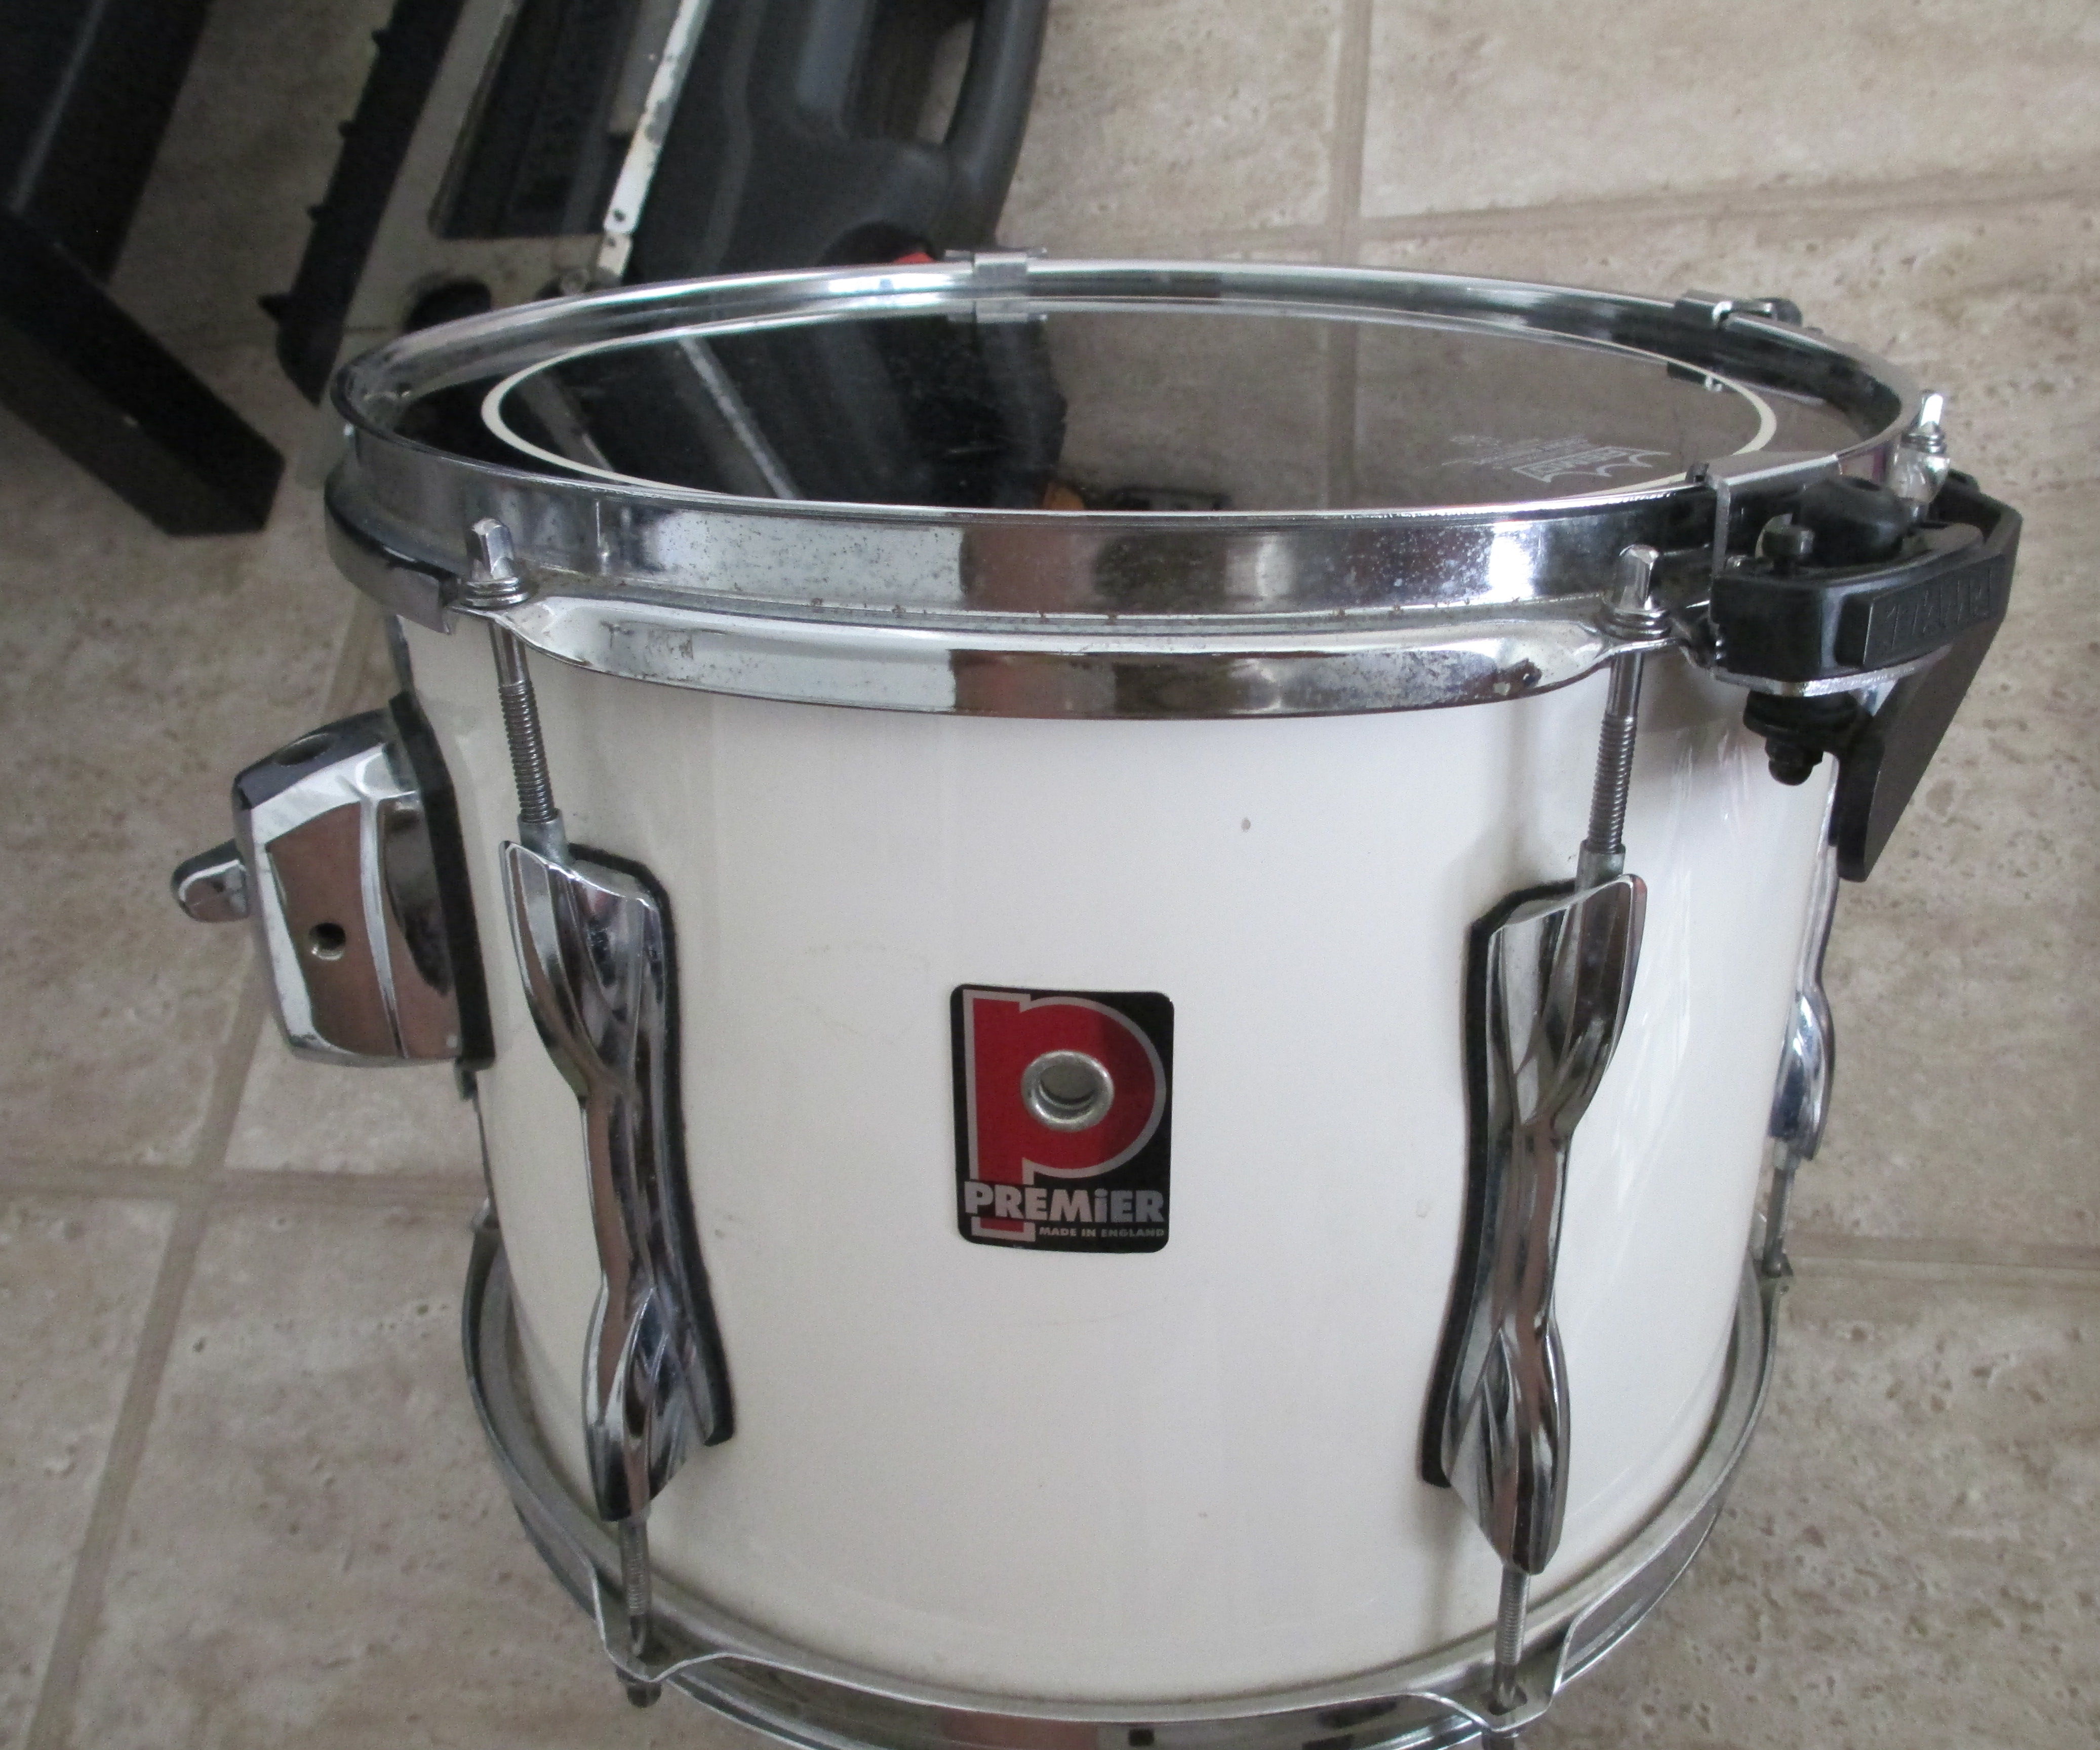 How to Convert any acoustic drum into an electric drum step by step guide